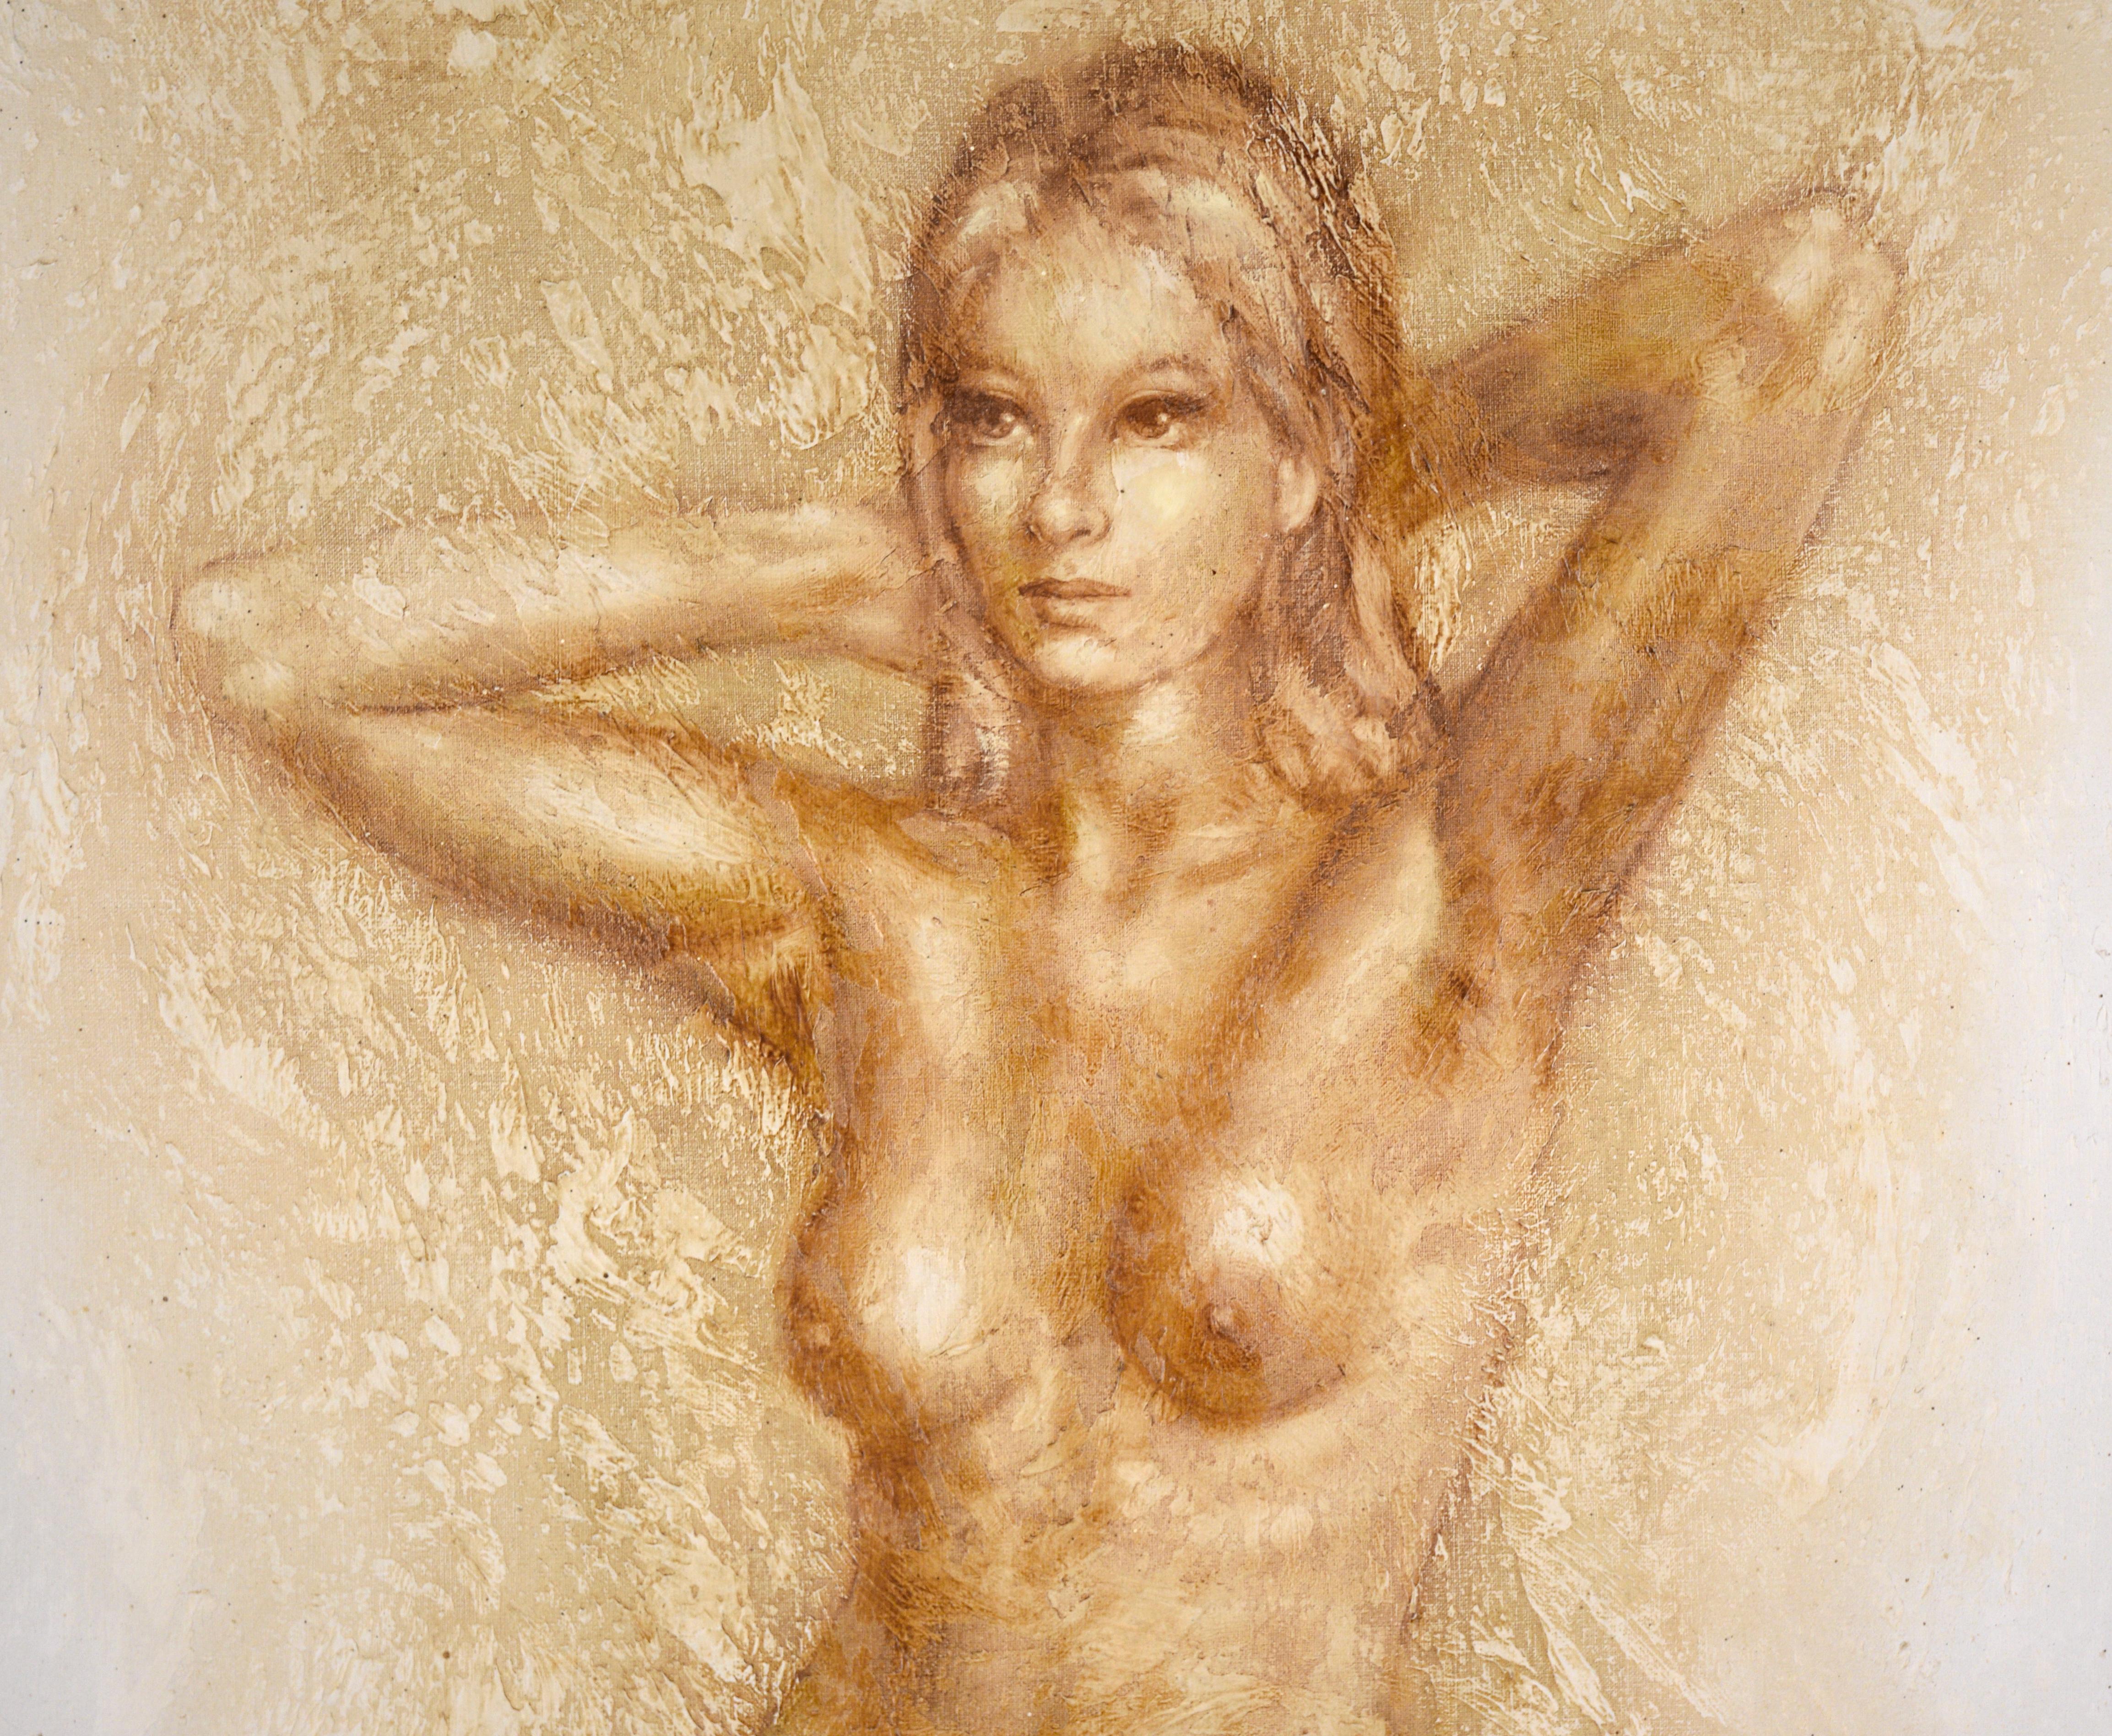 Standing Nude Woman - Acrylic on Canvas with Heavy Gesso - Painting by S Frank Aris